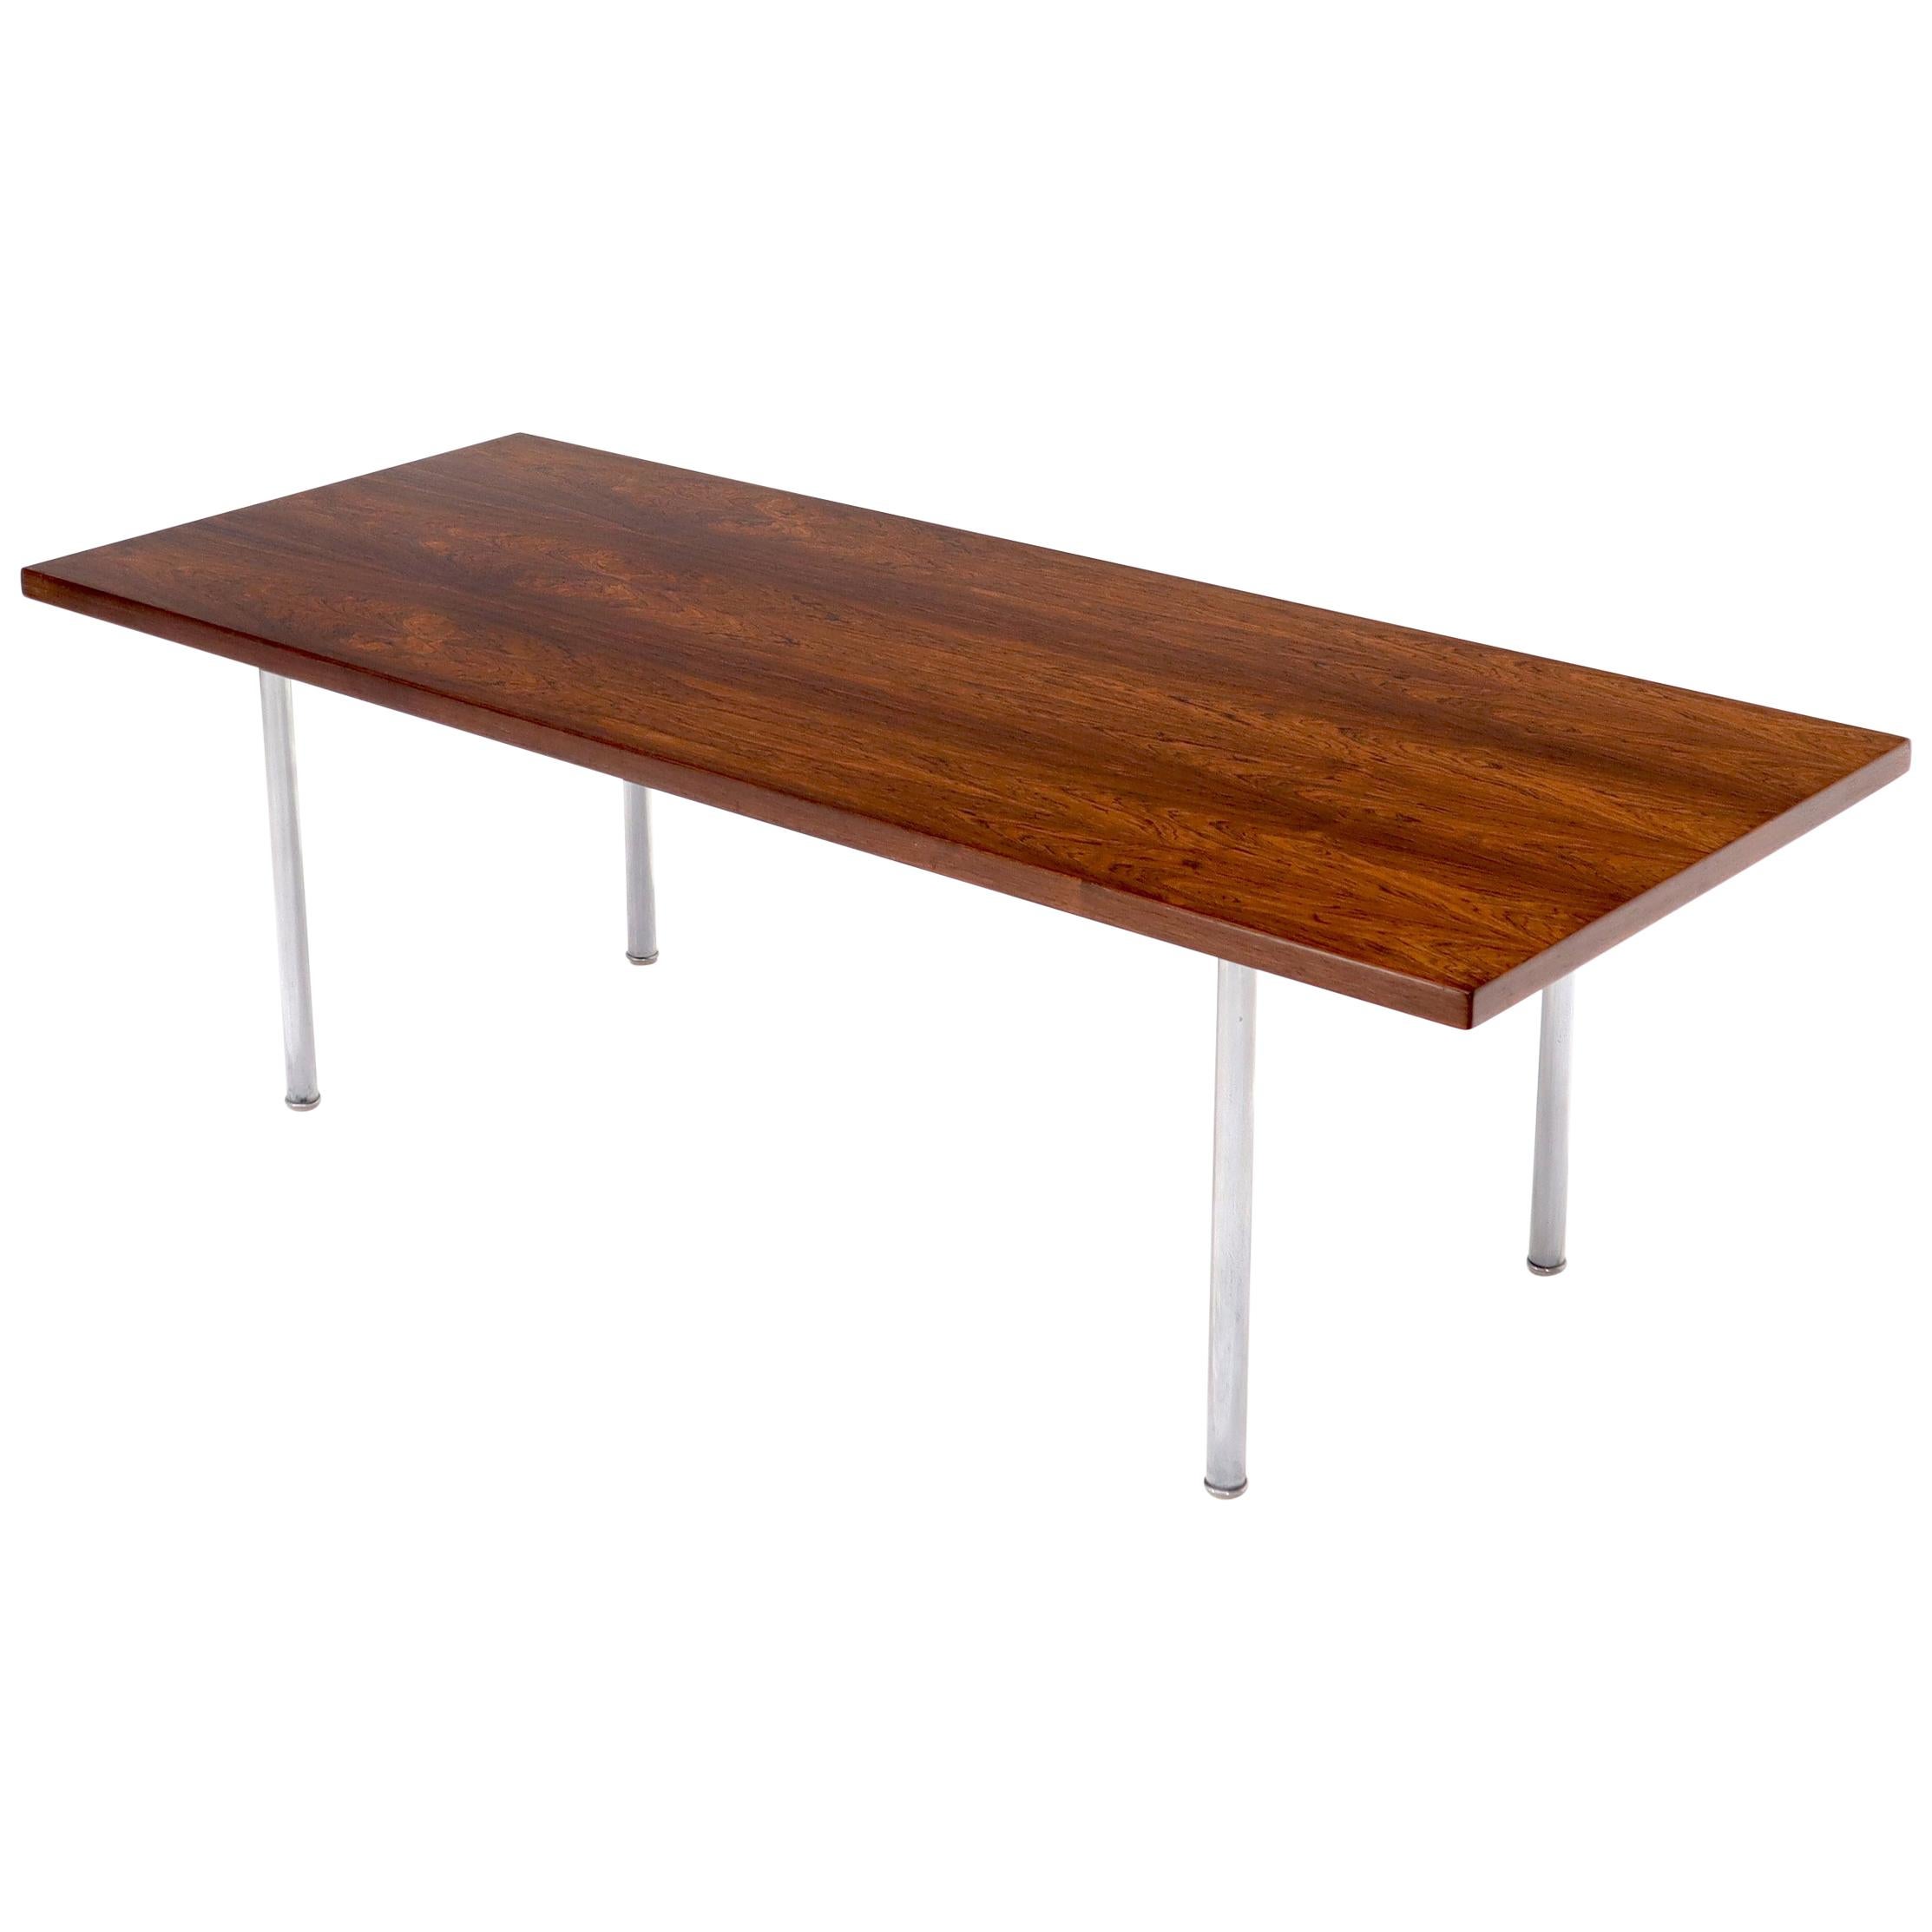 Hans Wegner Signed Rosewood Coffee Table on Chrome Cylinder Legs For Sale